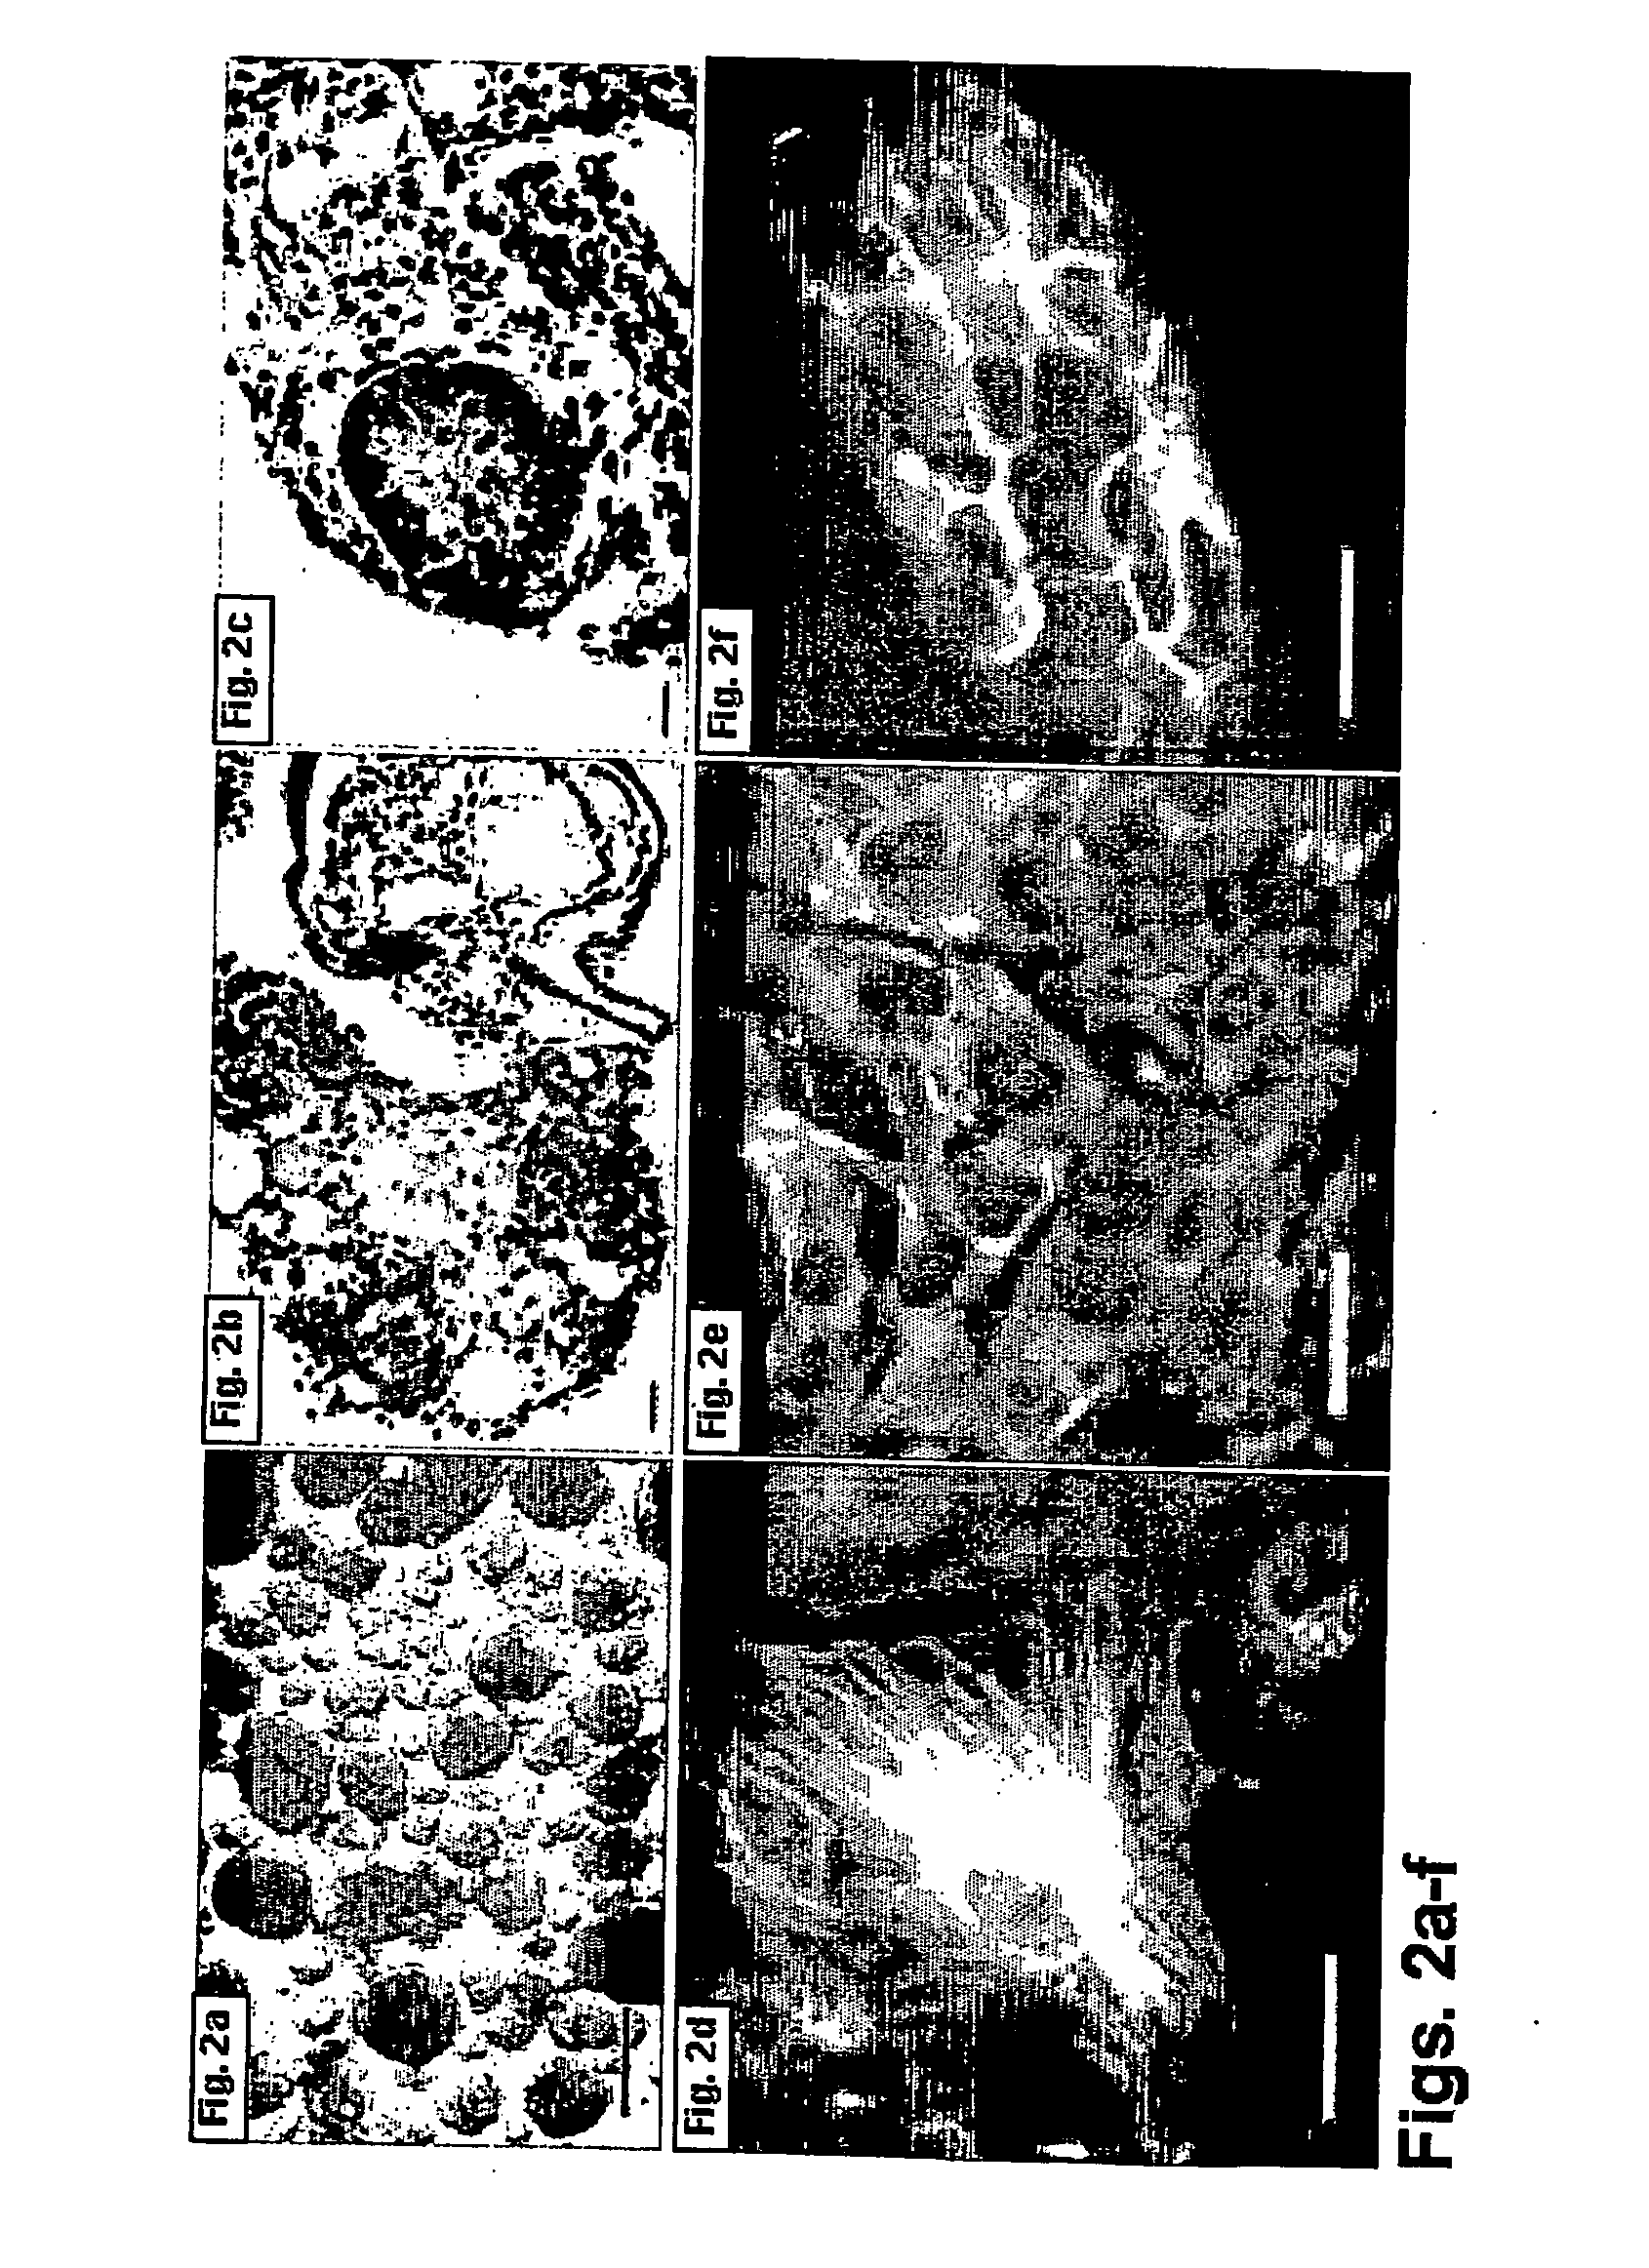 Methods of preparing feeder cells-free, xeno-free human embryonic stem cells and stem cell cultures prepared using same